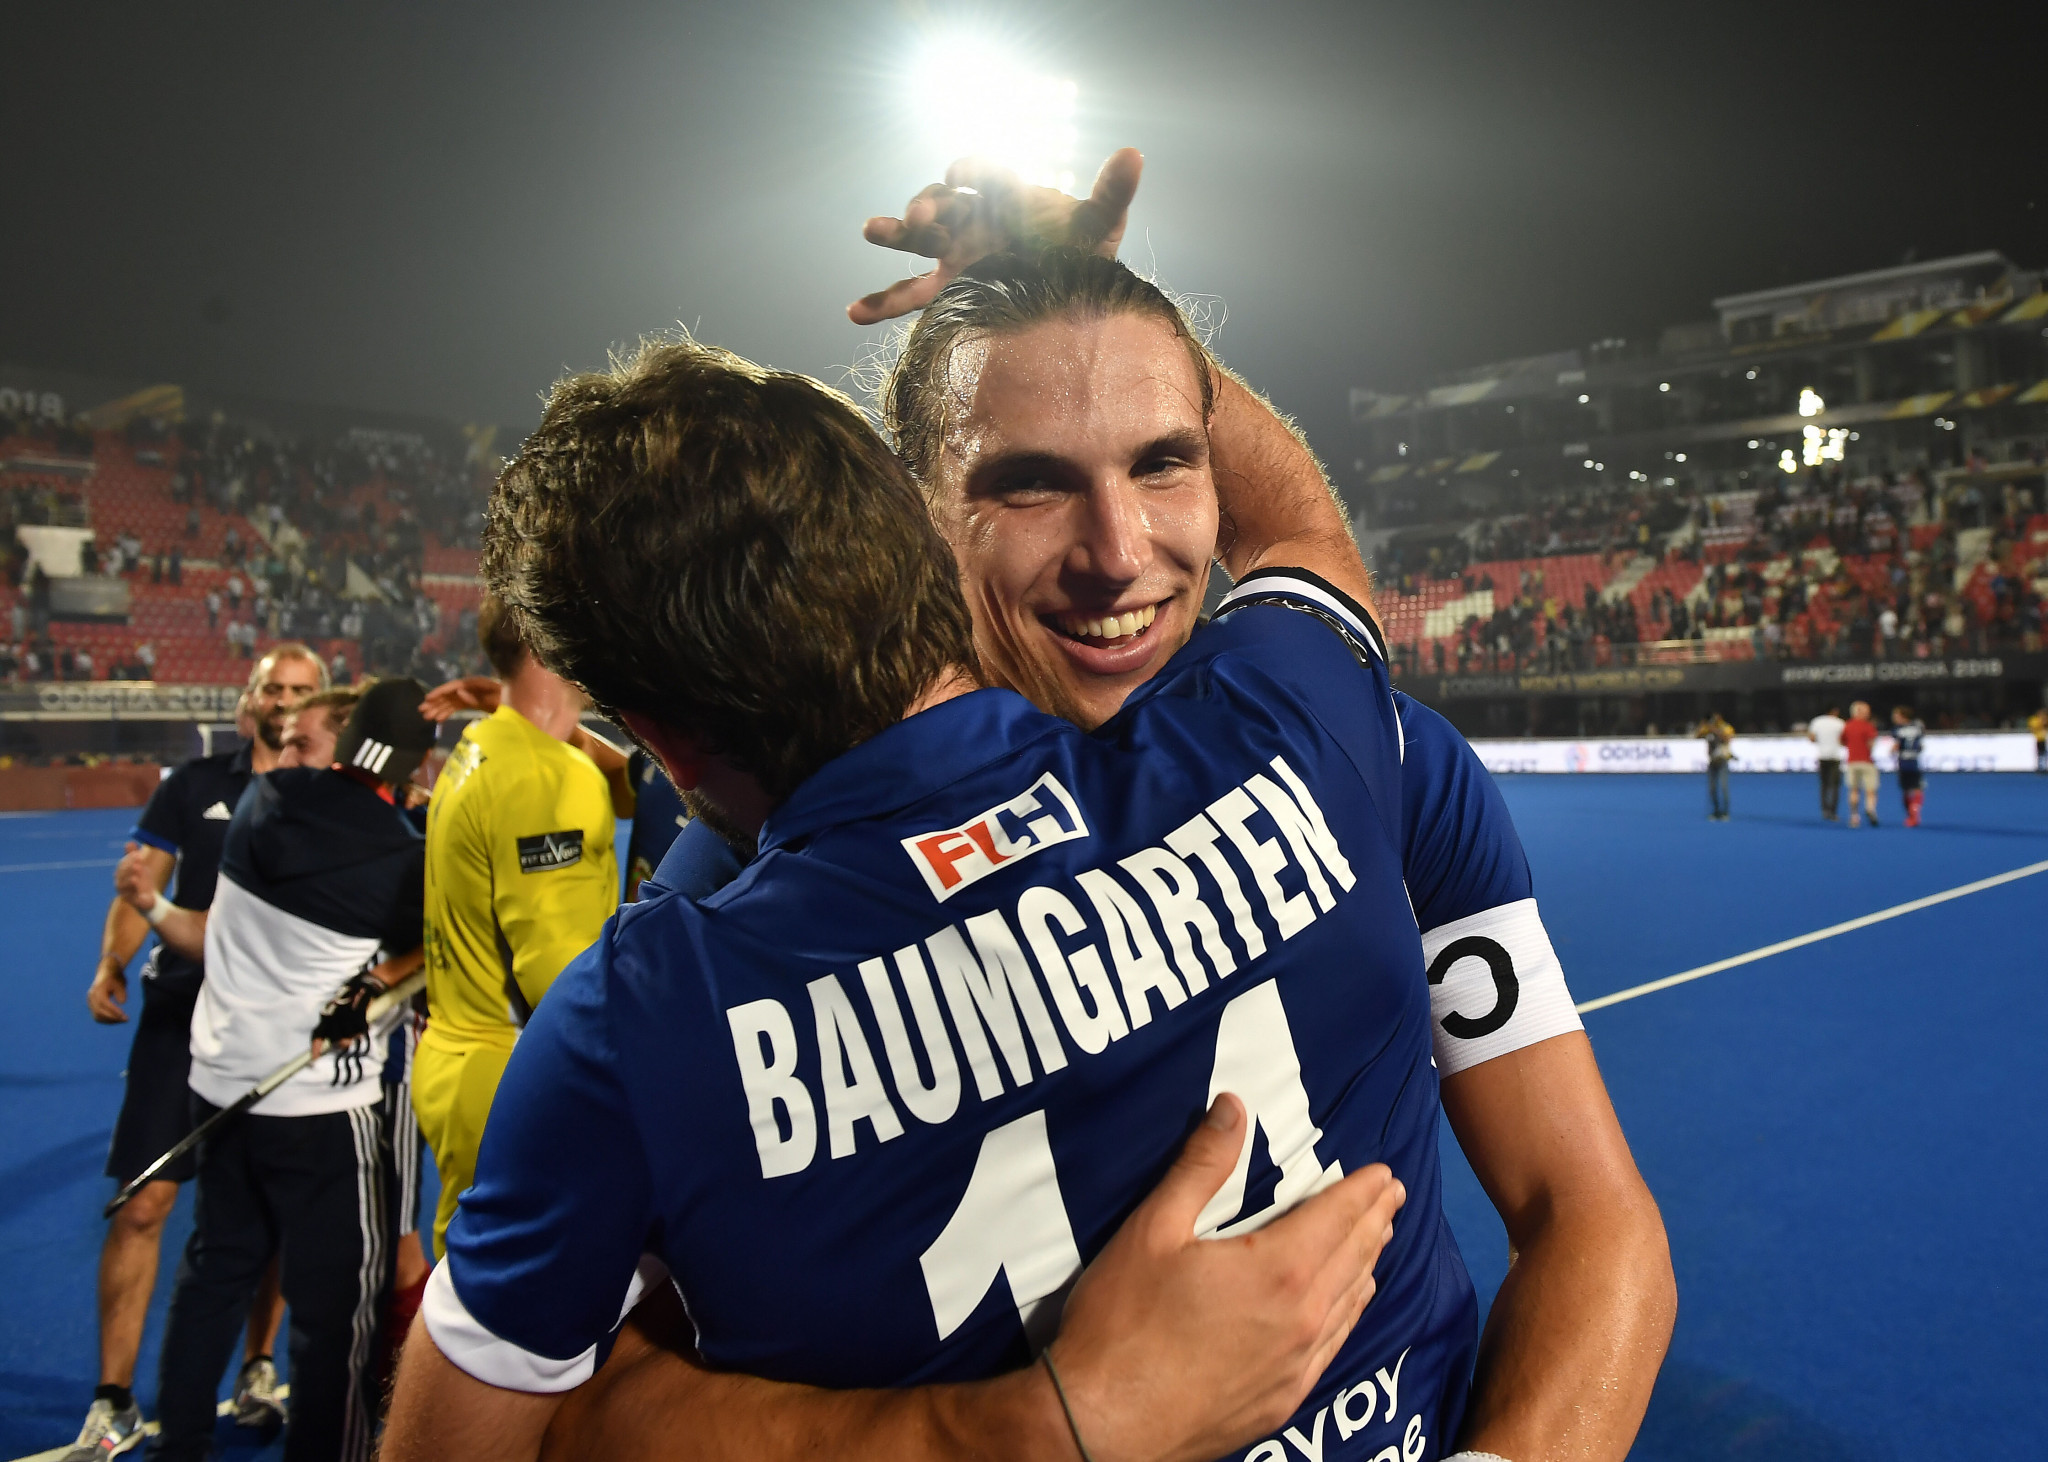 Gaspard Baumgarten scored twice for France in their 4-1 win against South Africa in the latest round of the Pro League ©Getty Images